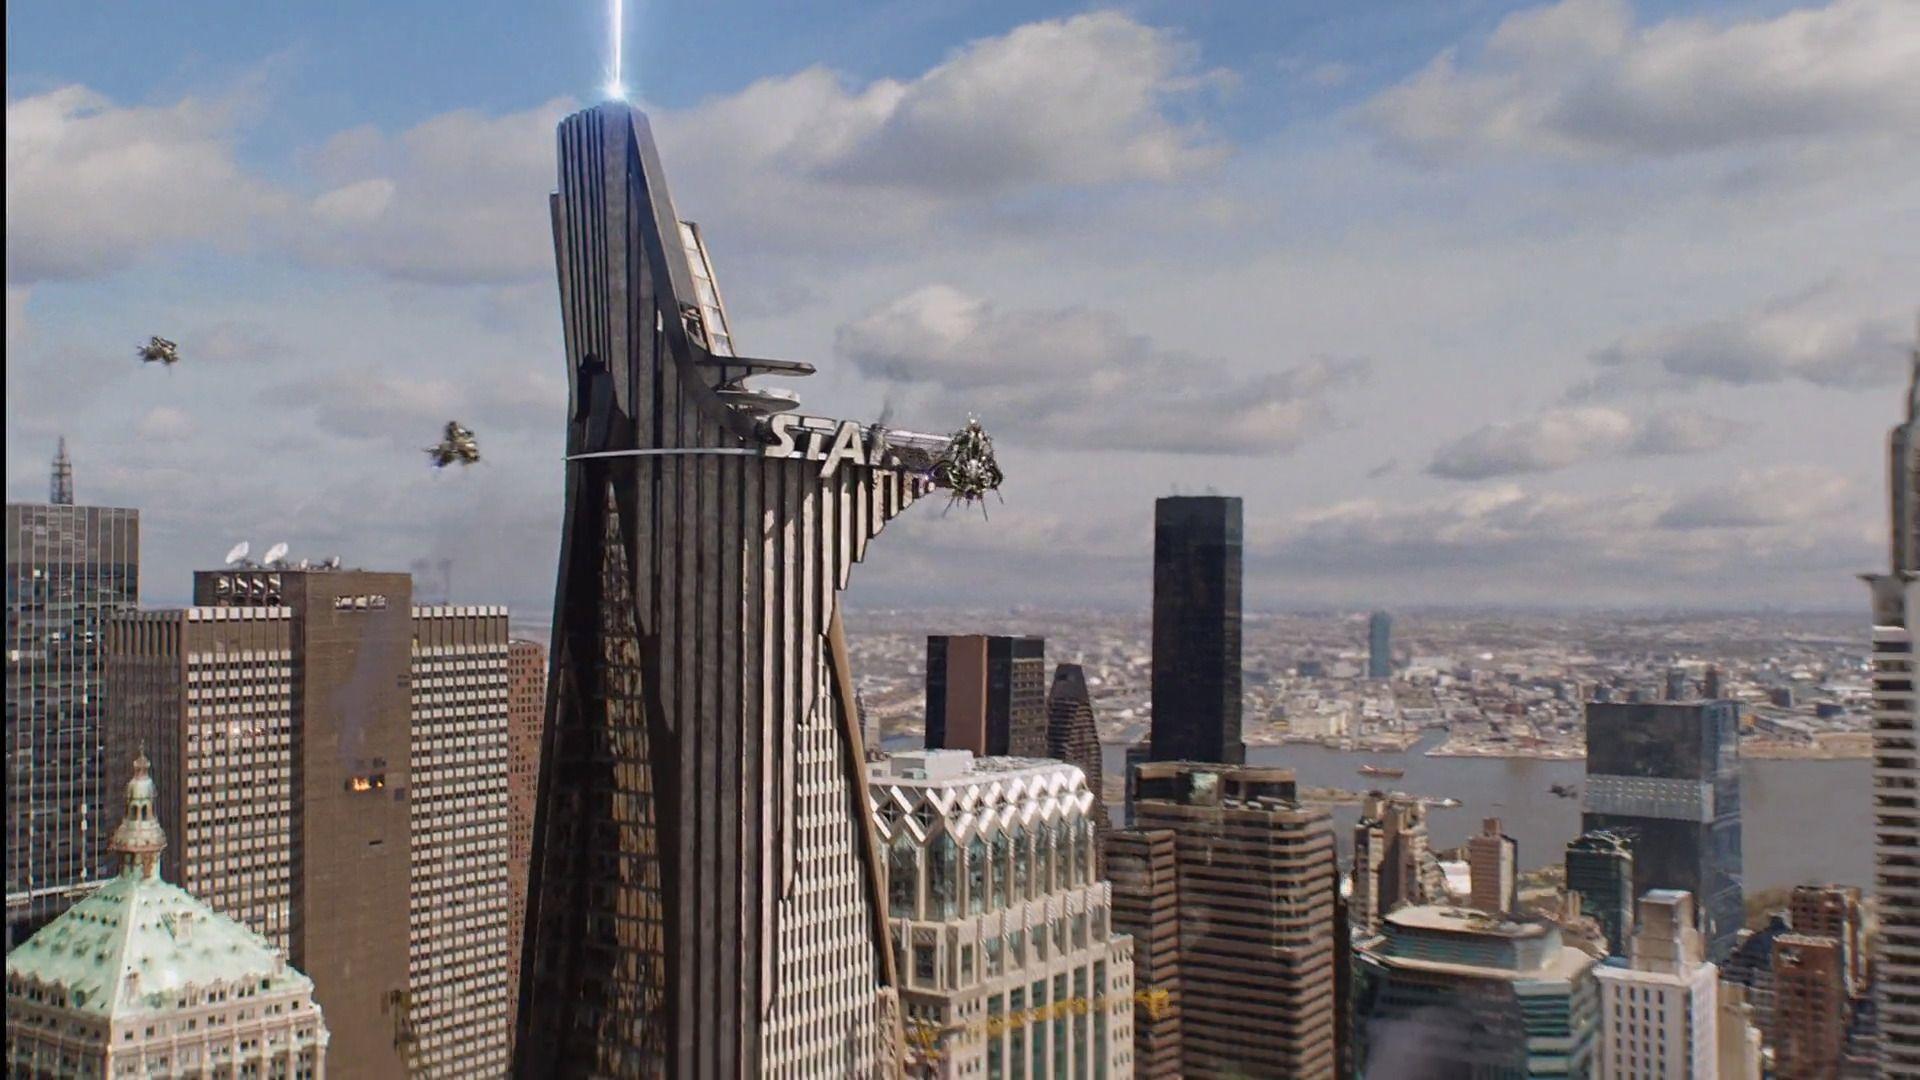 Avengers Tower. Marvel Cinematic Universe